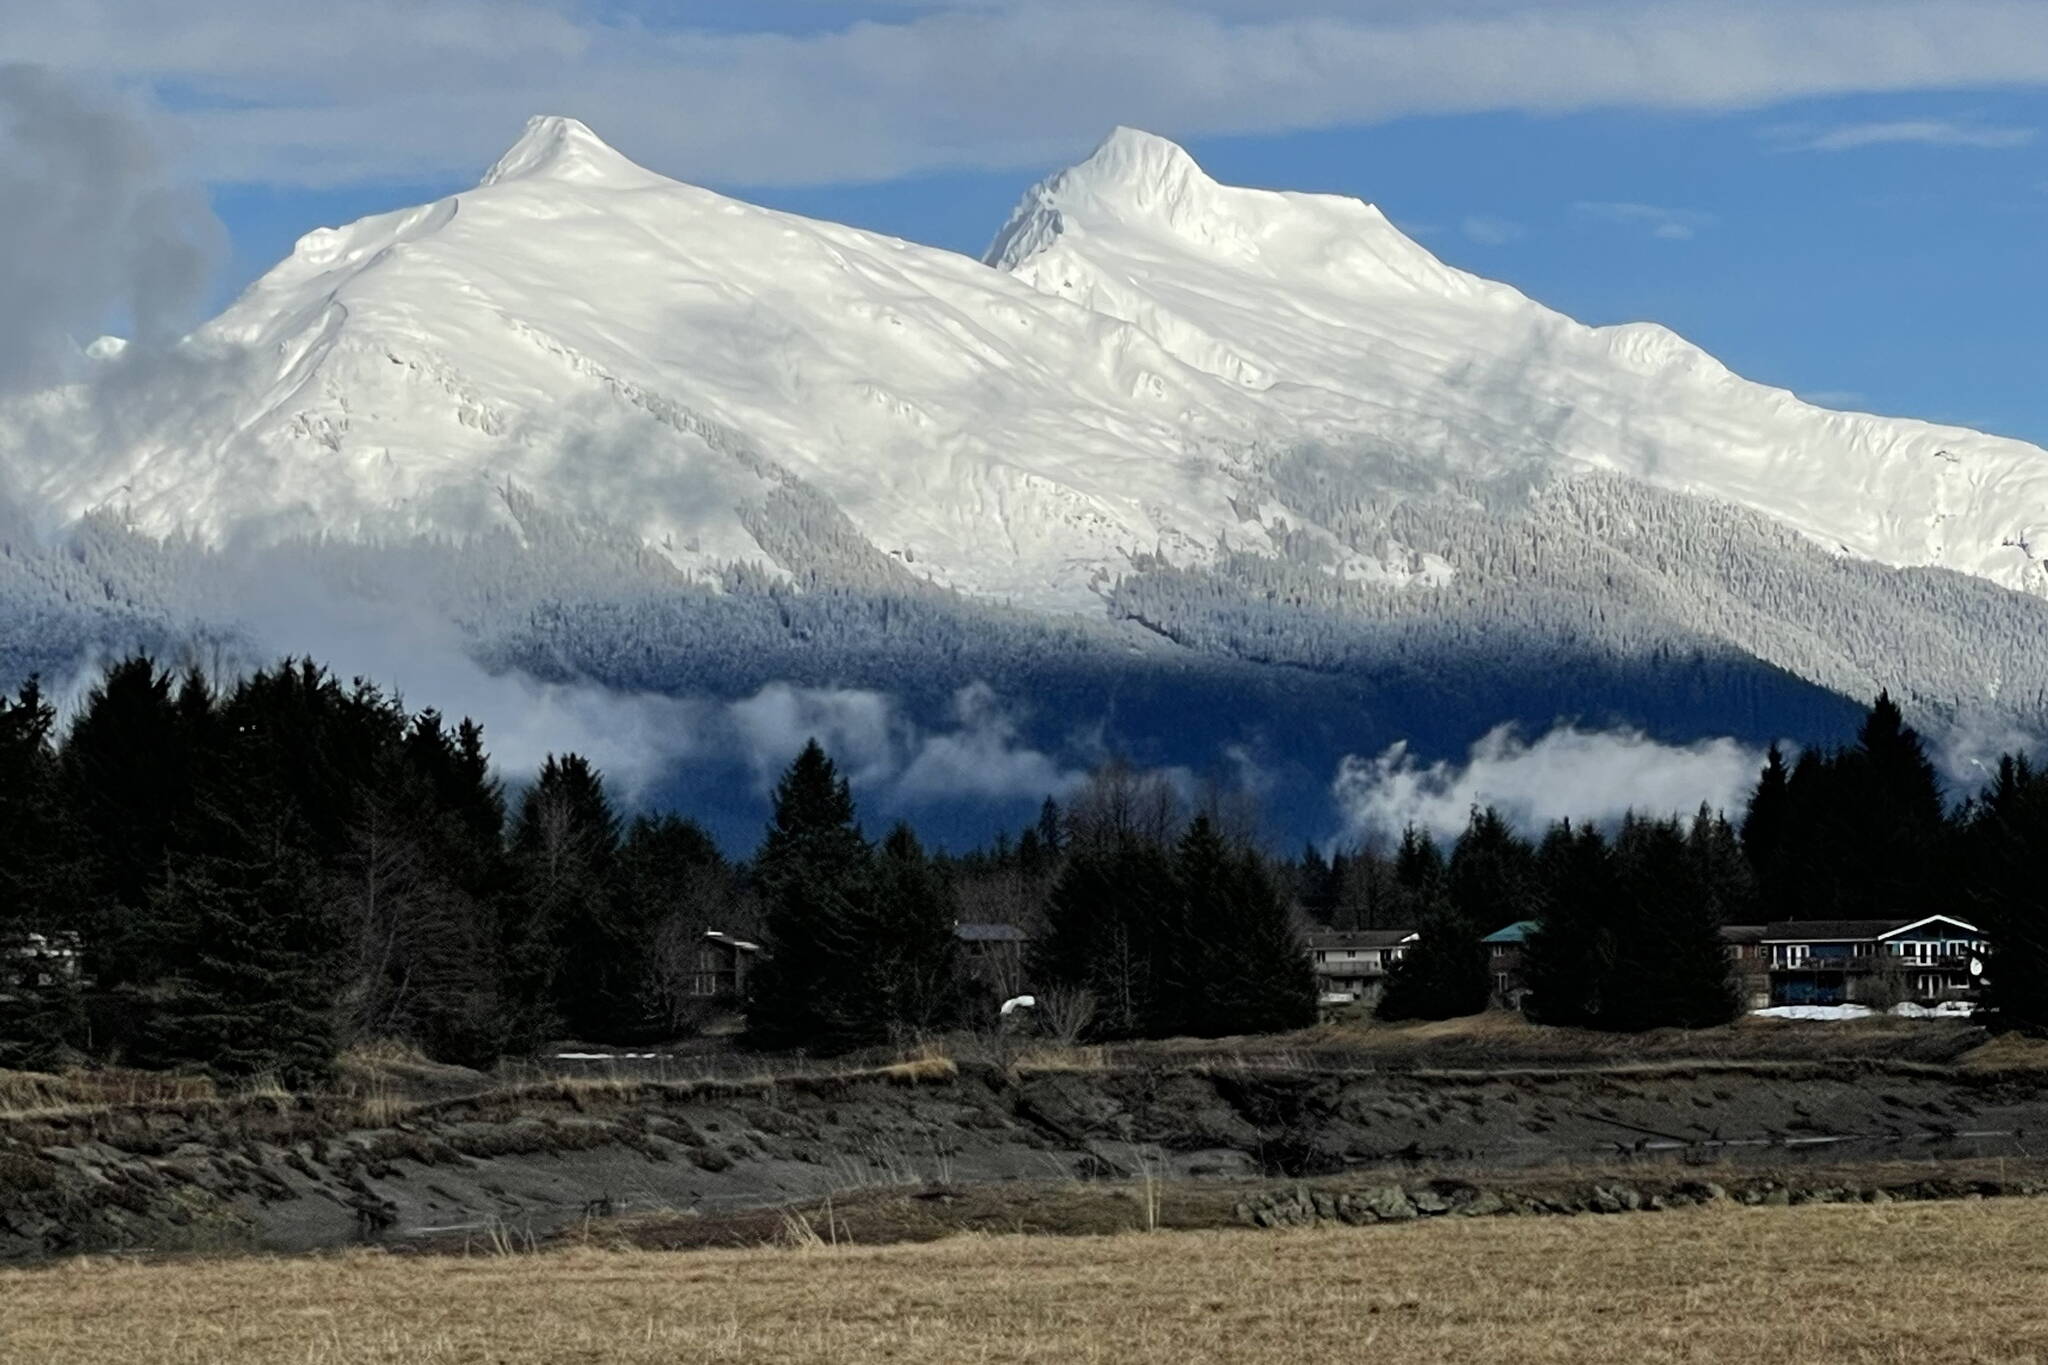 Snow covers Mount Stroller White, a 5,112-foot peak beside Mendenhall Glacier, with Mount McGinnis seen to the left. (Photo by Laurie Craig)